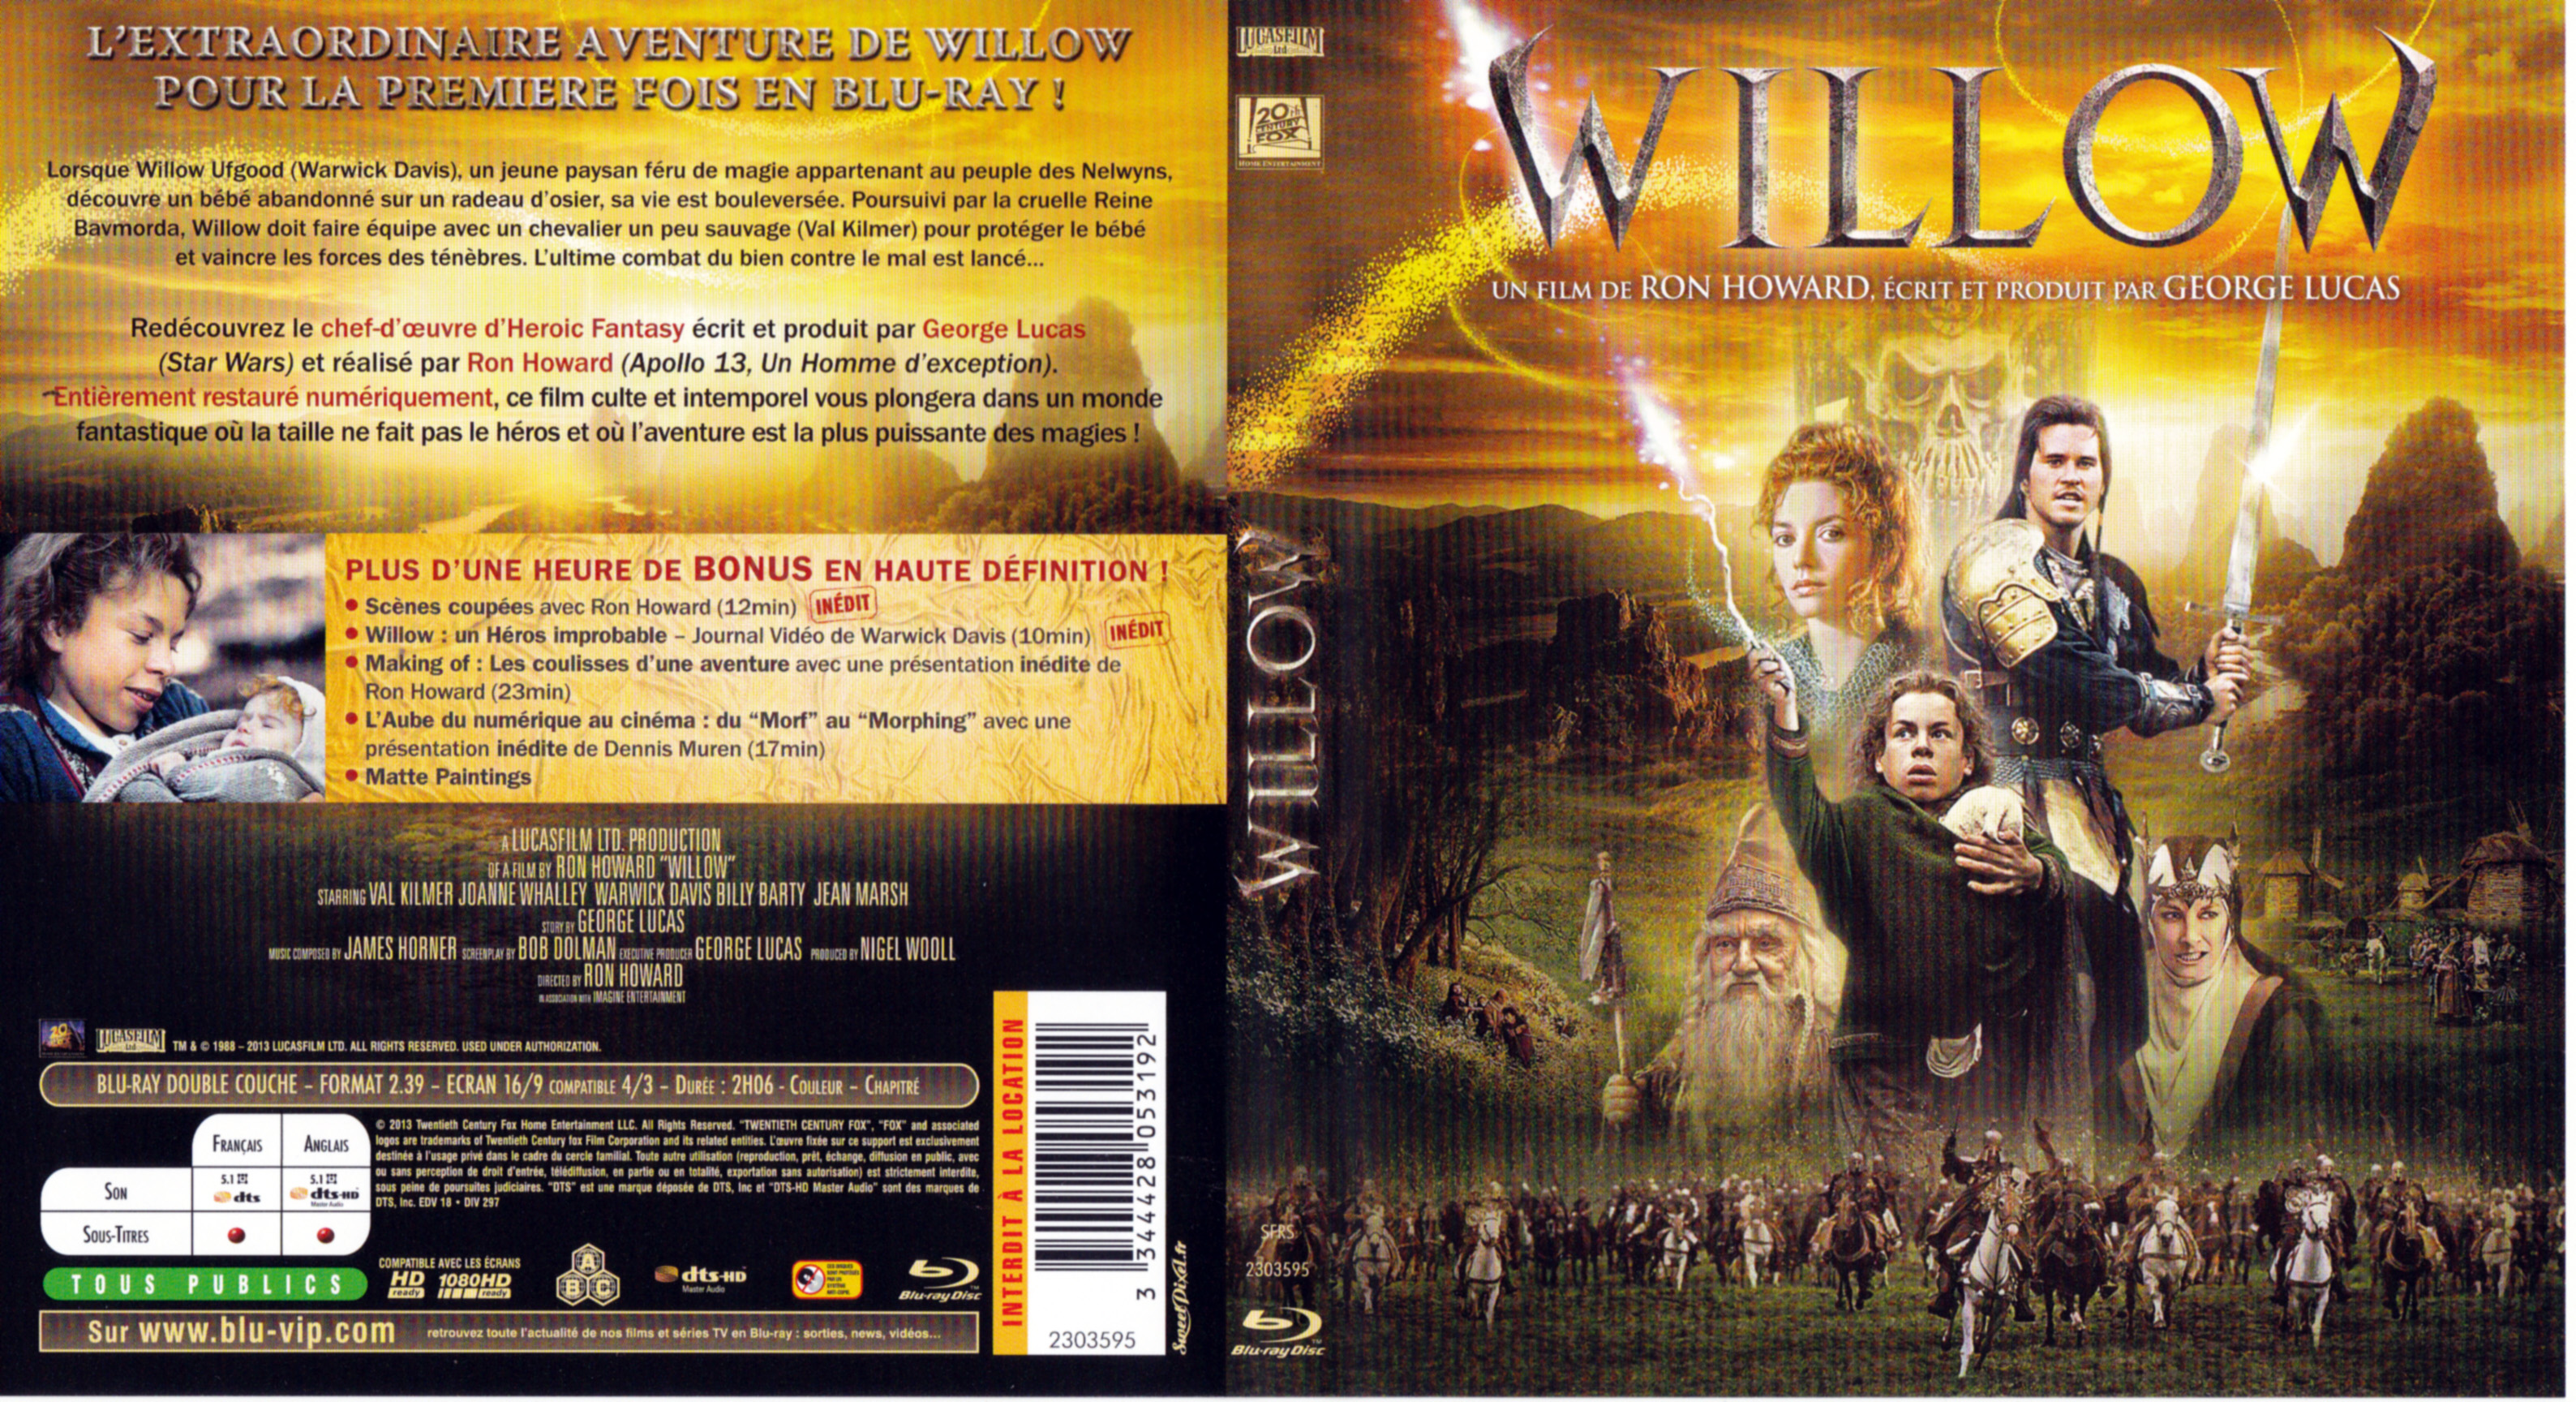 Jaquette DVD Willow (BLU-RAY) v2